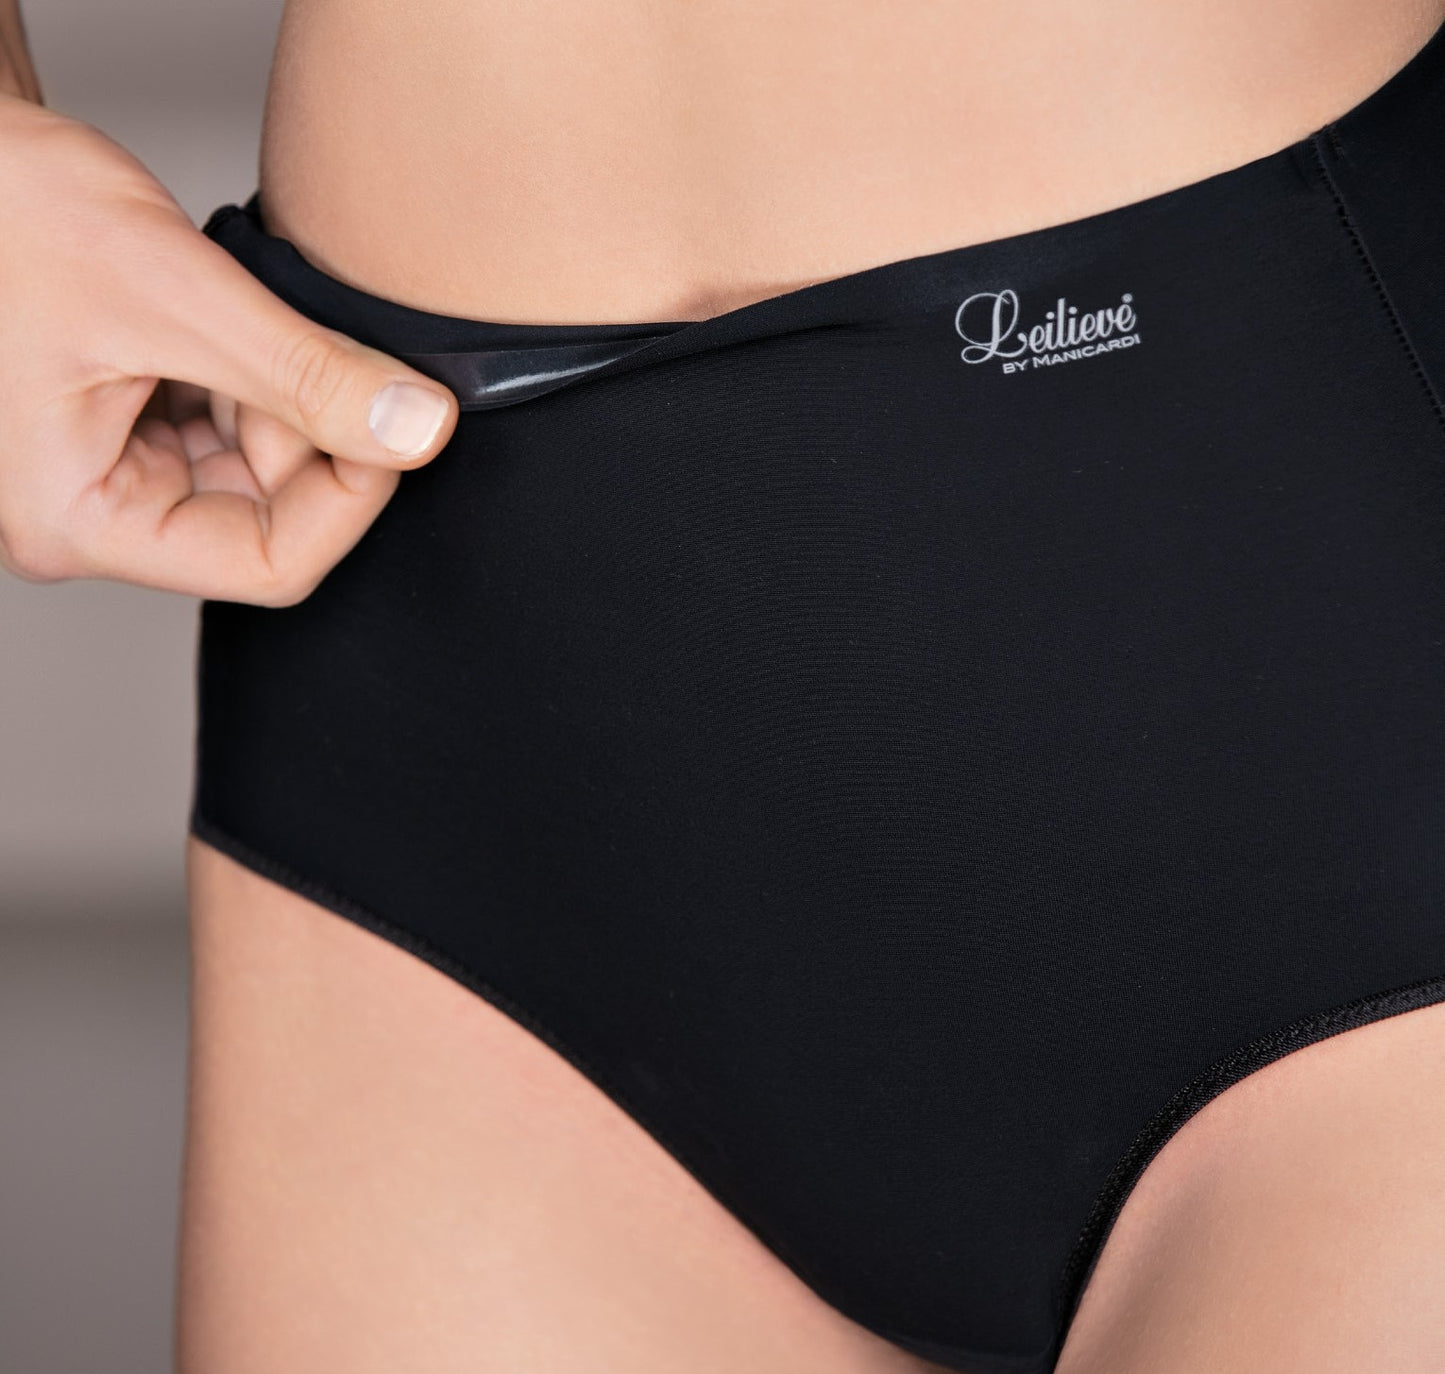 Modern, elegant and shaping full-briefs from the Sculpt line by Leilieve from Italy. 